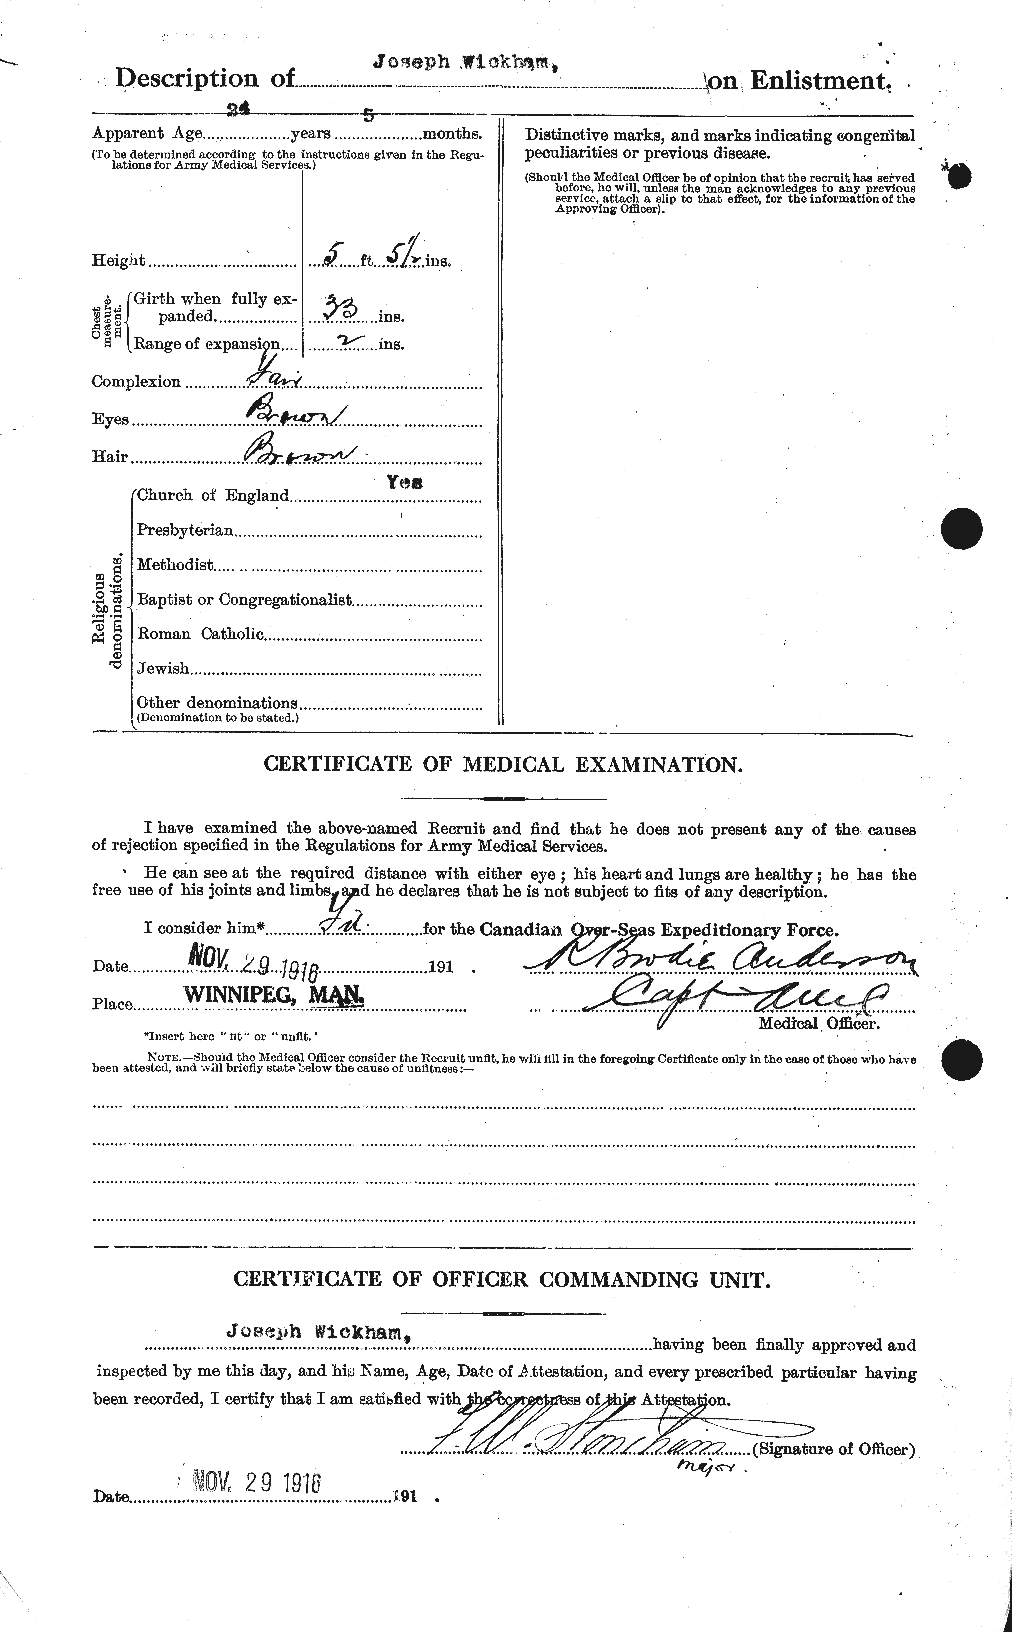 Personnel Records of the First World War - CEF 673952b